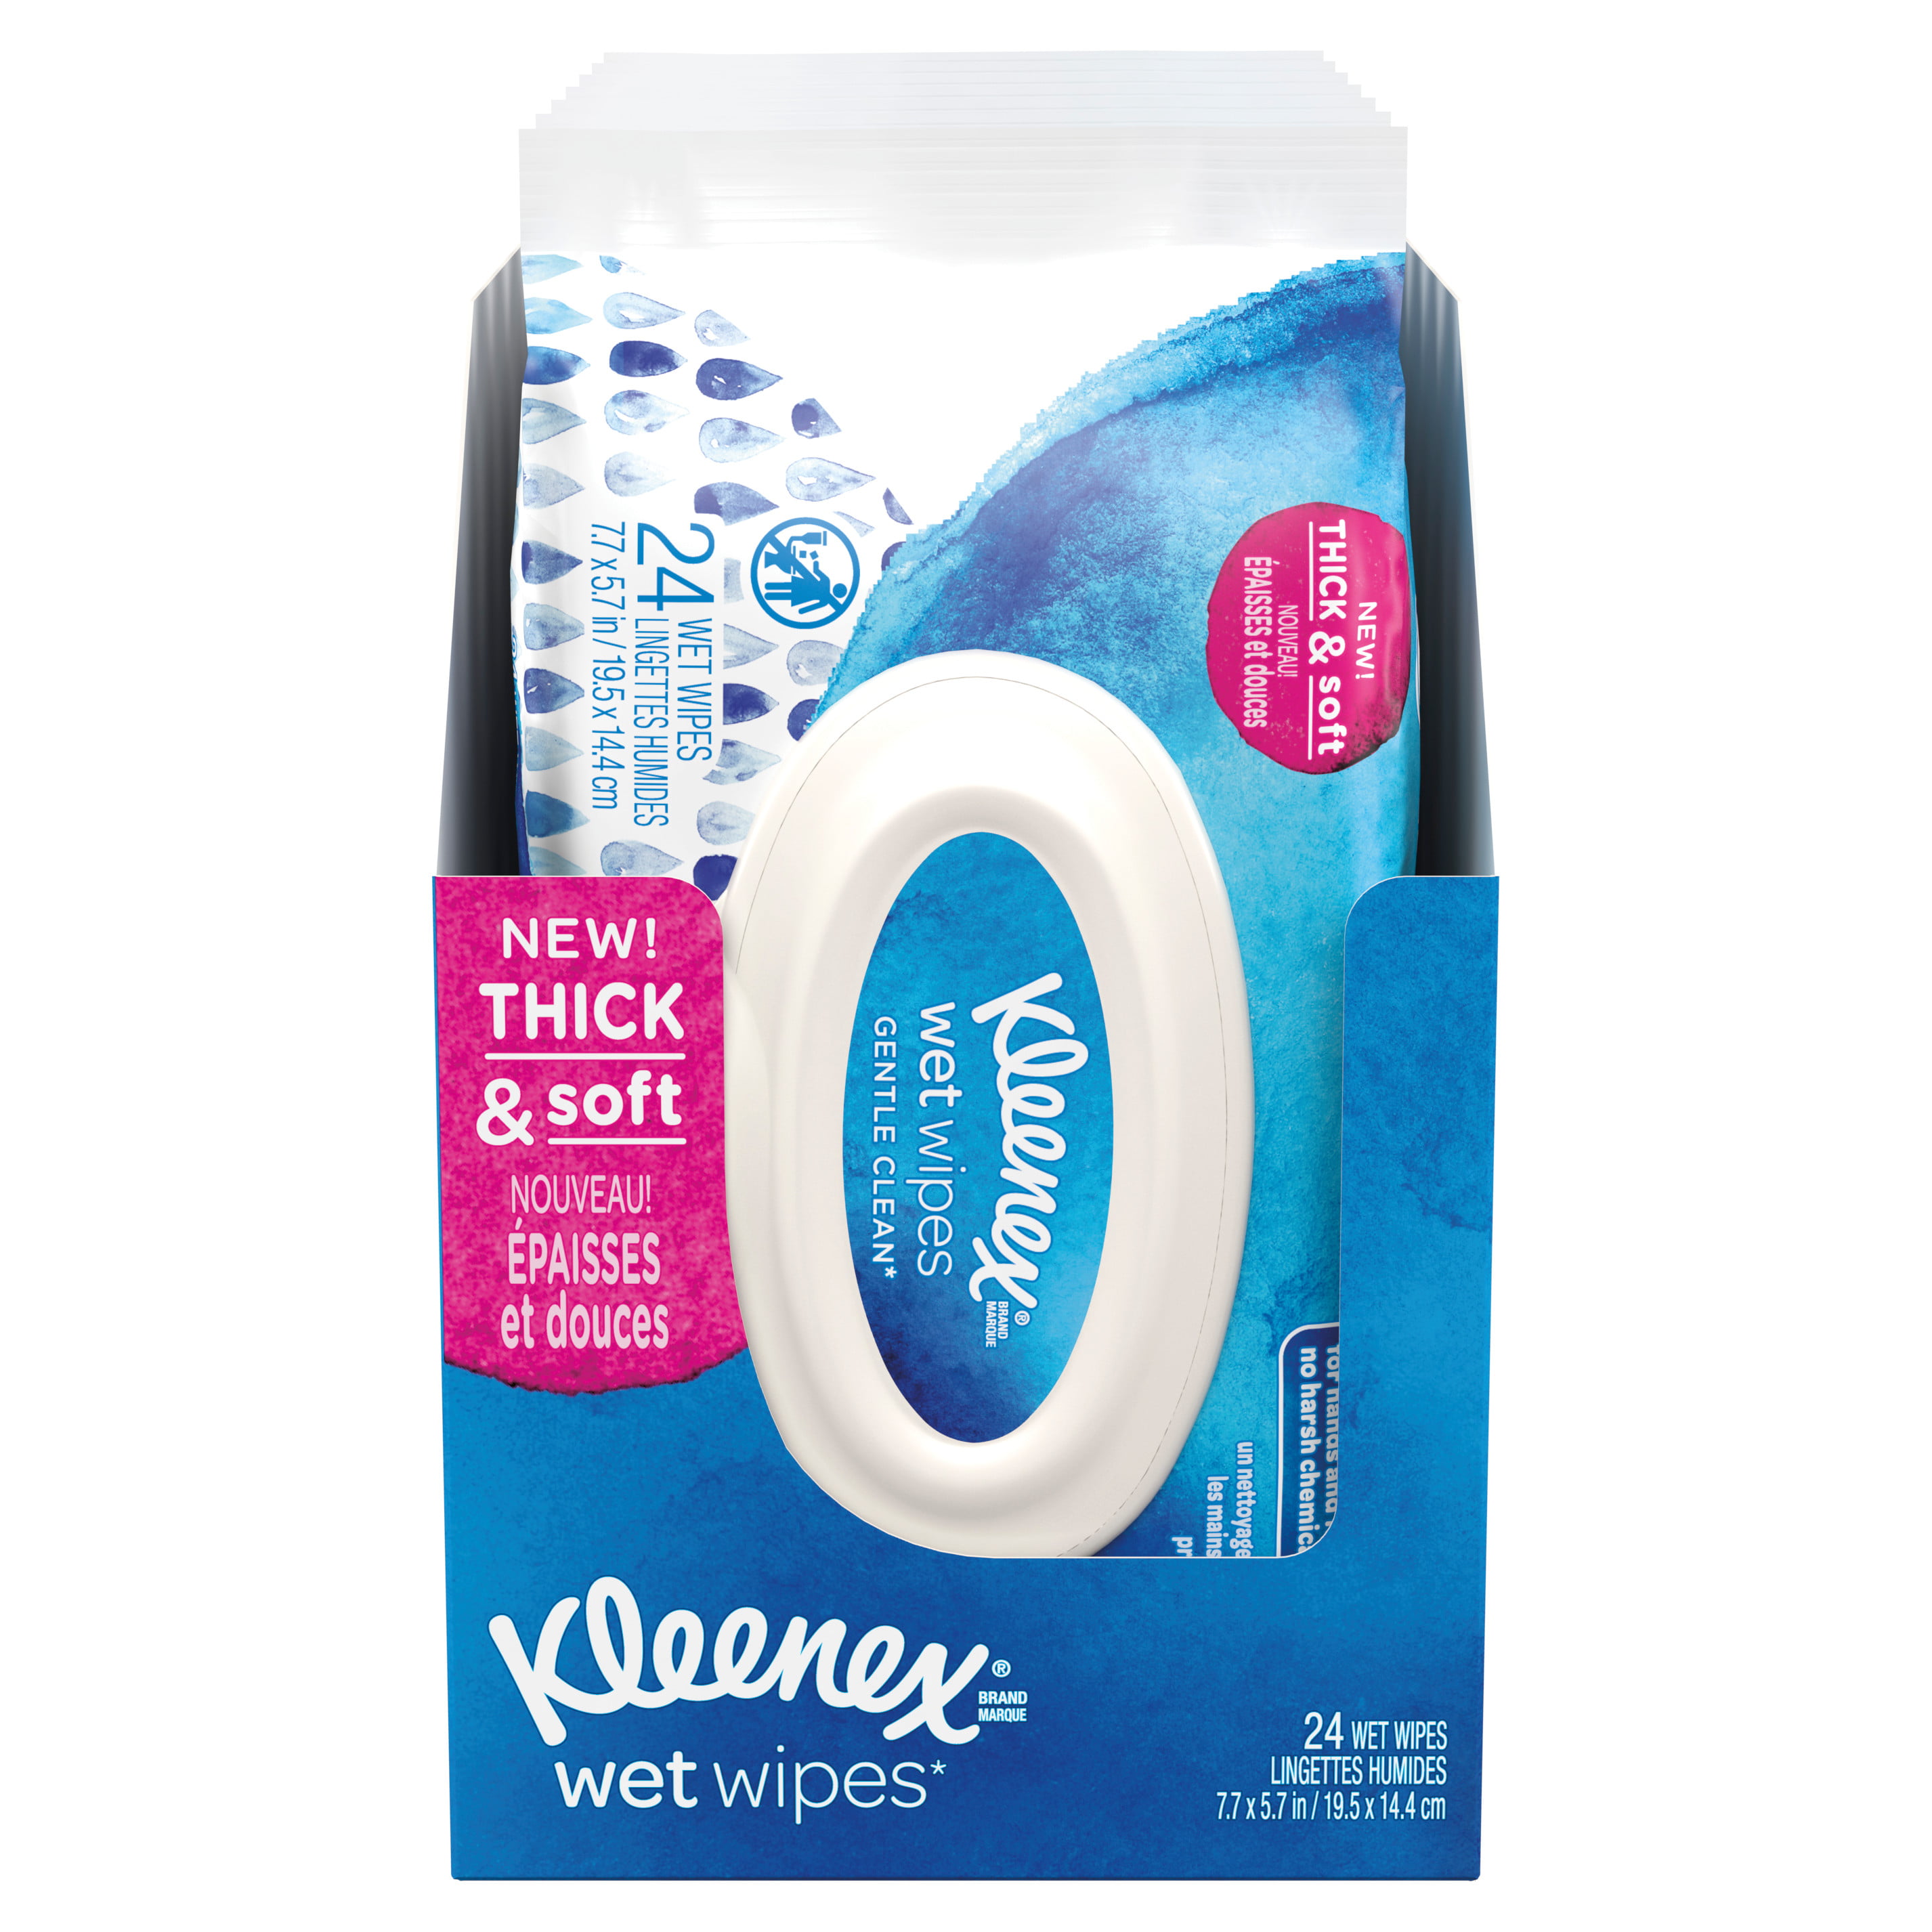 Packaging May Vary 1 Box of 300 Individually Wrapped Wipes Kleenex Wet Wipes Gentle Clean for Hands and Face